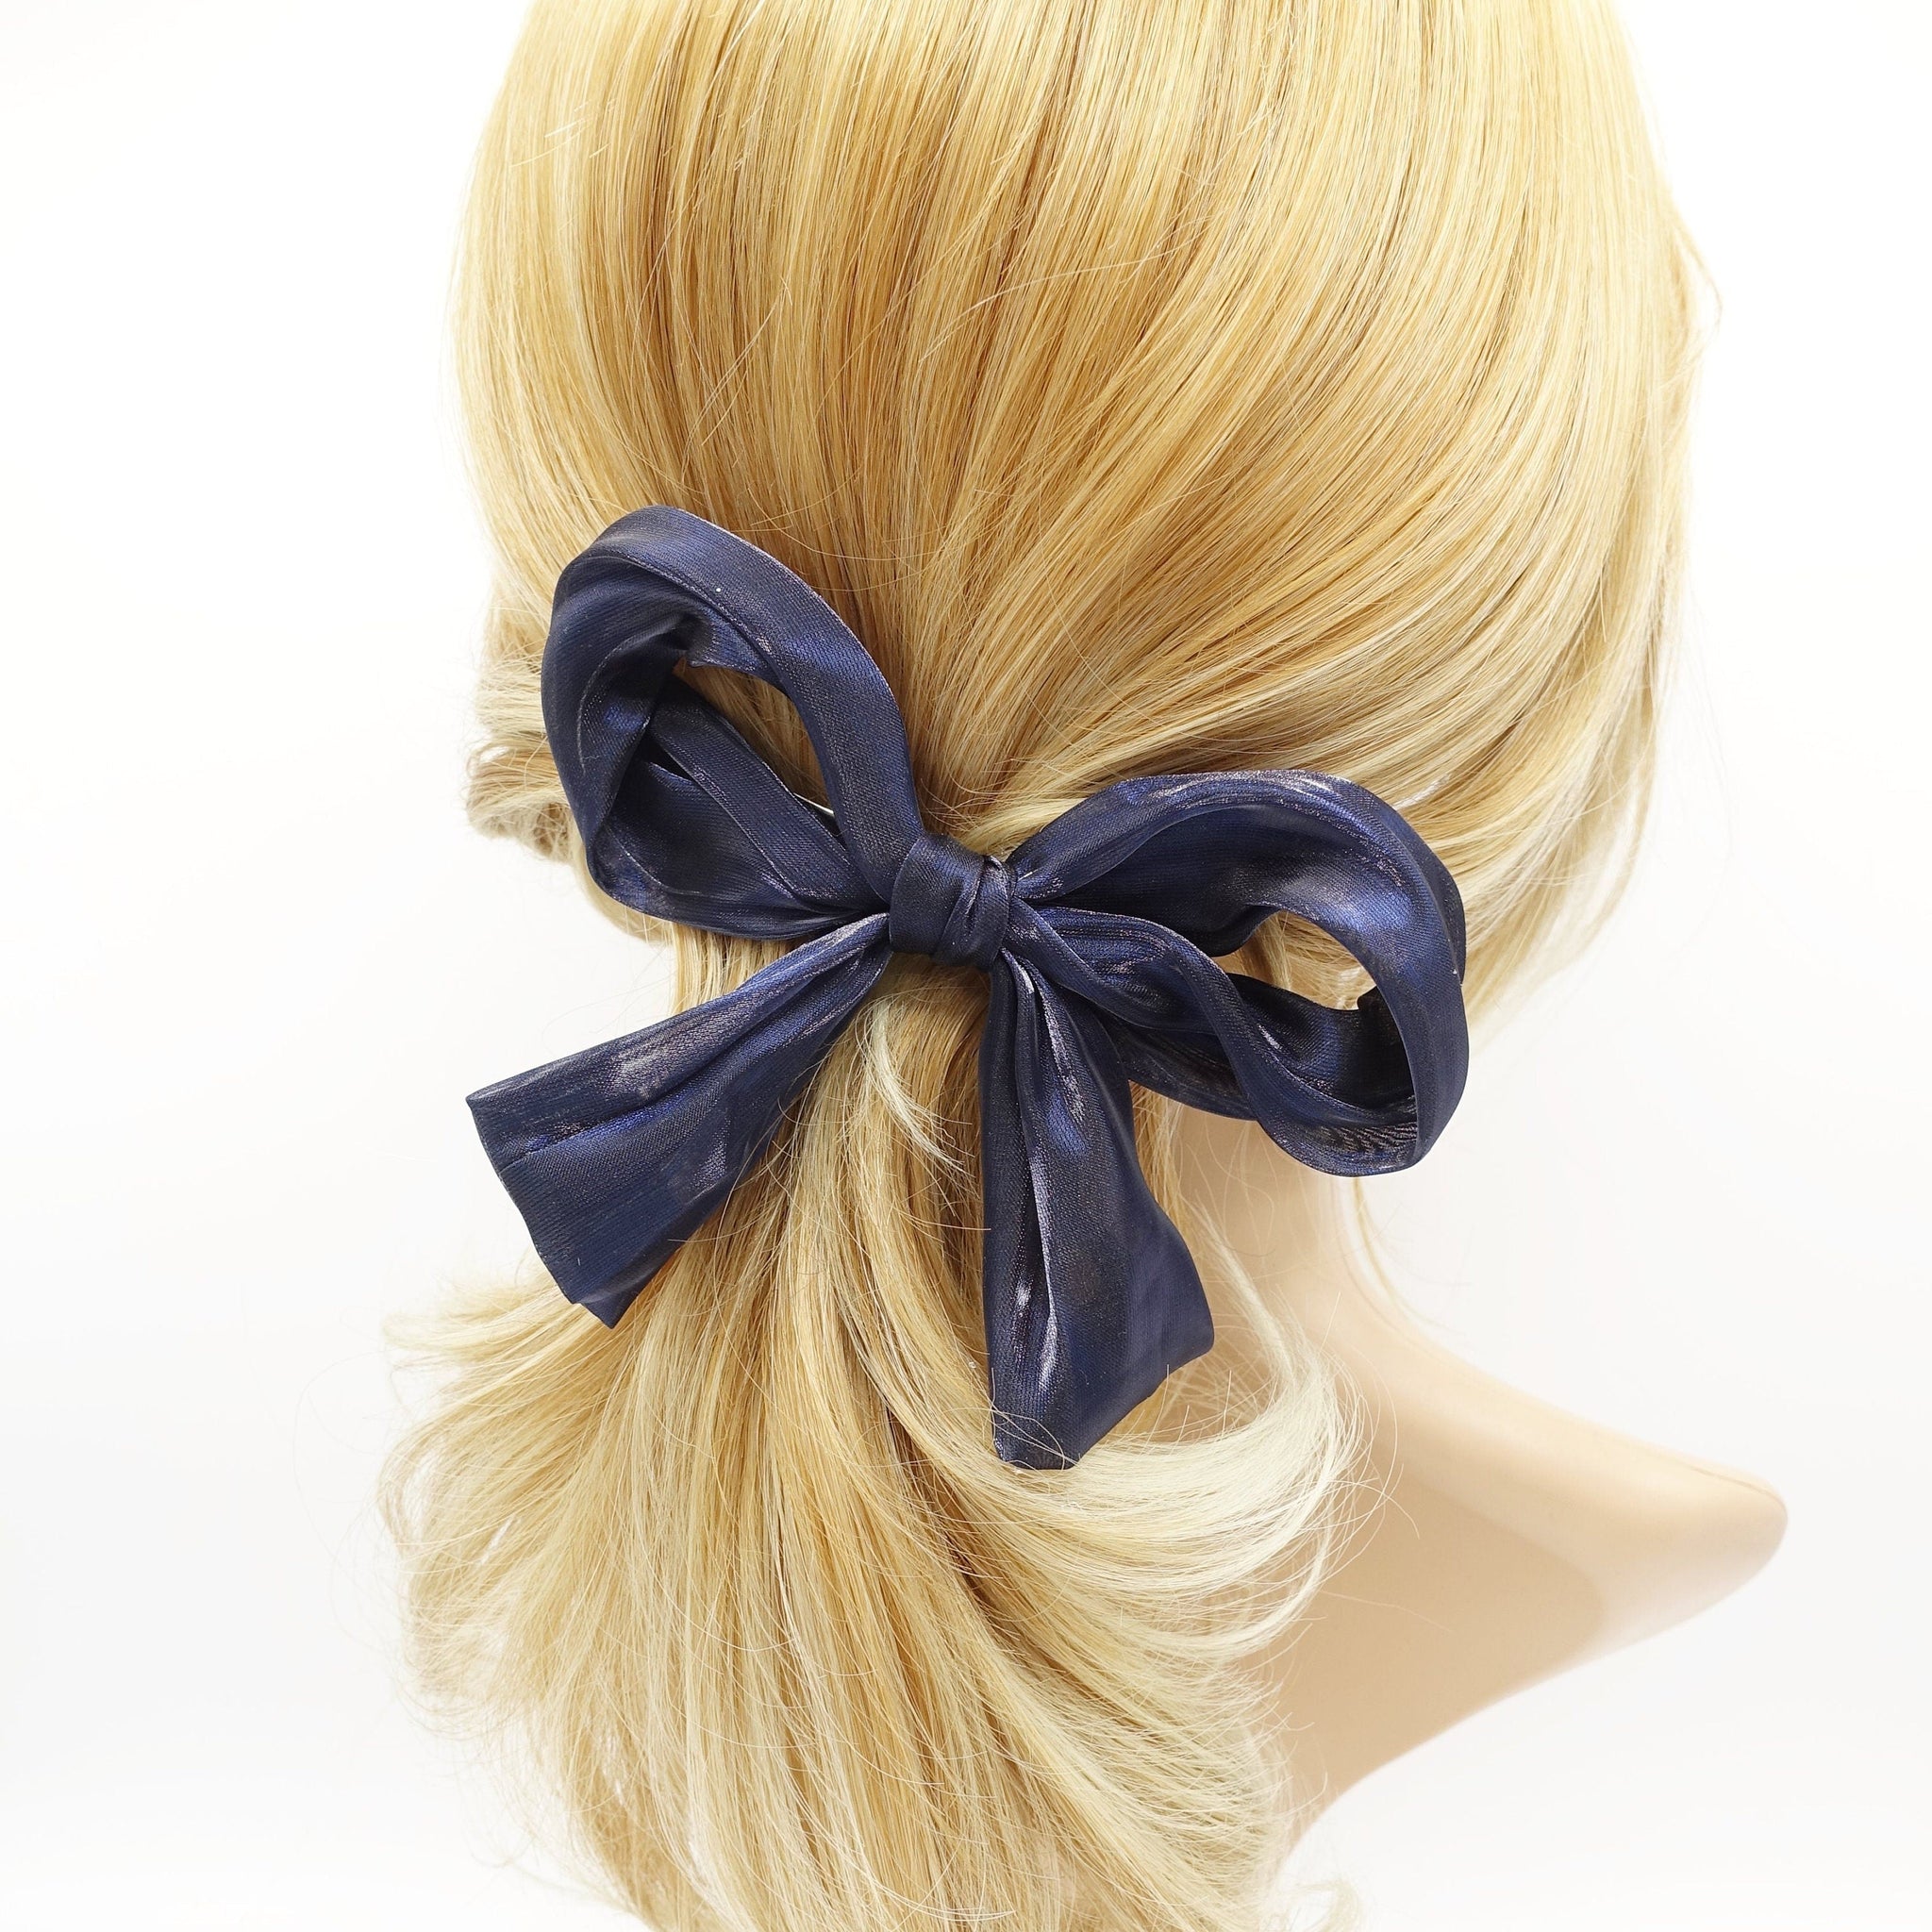 veryshine.com Barrette (Bow) Navy organza wired hair bow colorful translucent fabric tail knotted bow french barrette women hair accessory